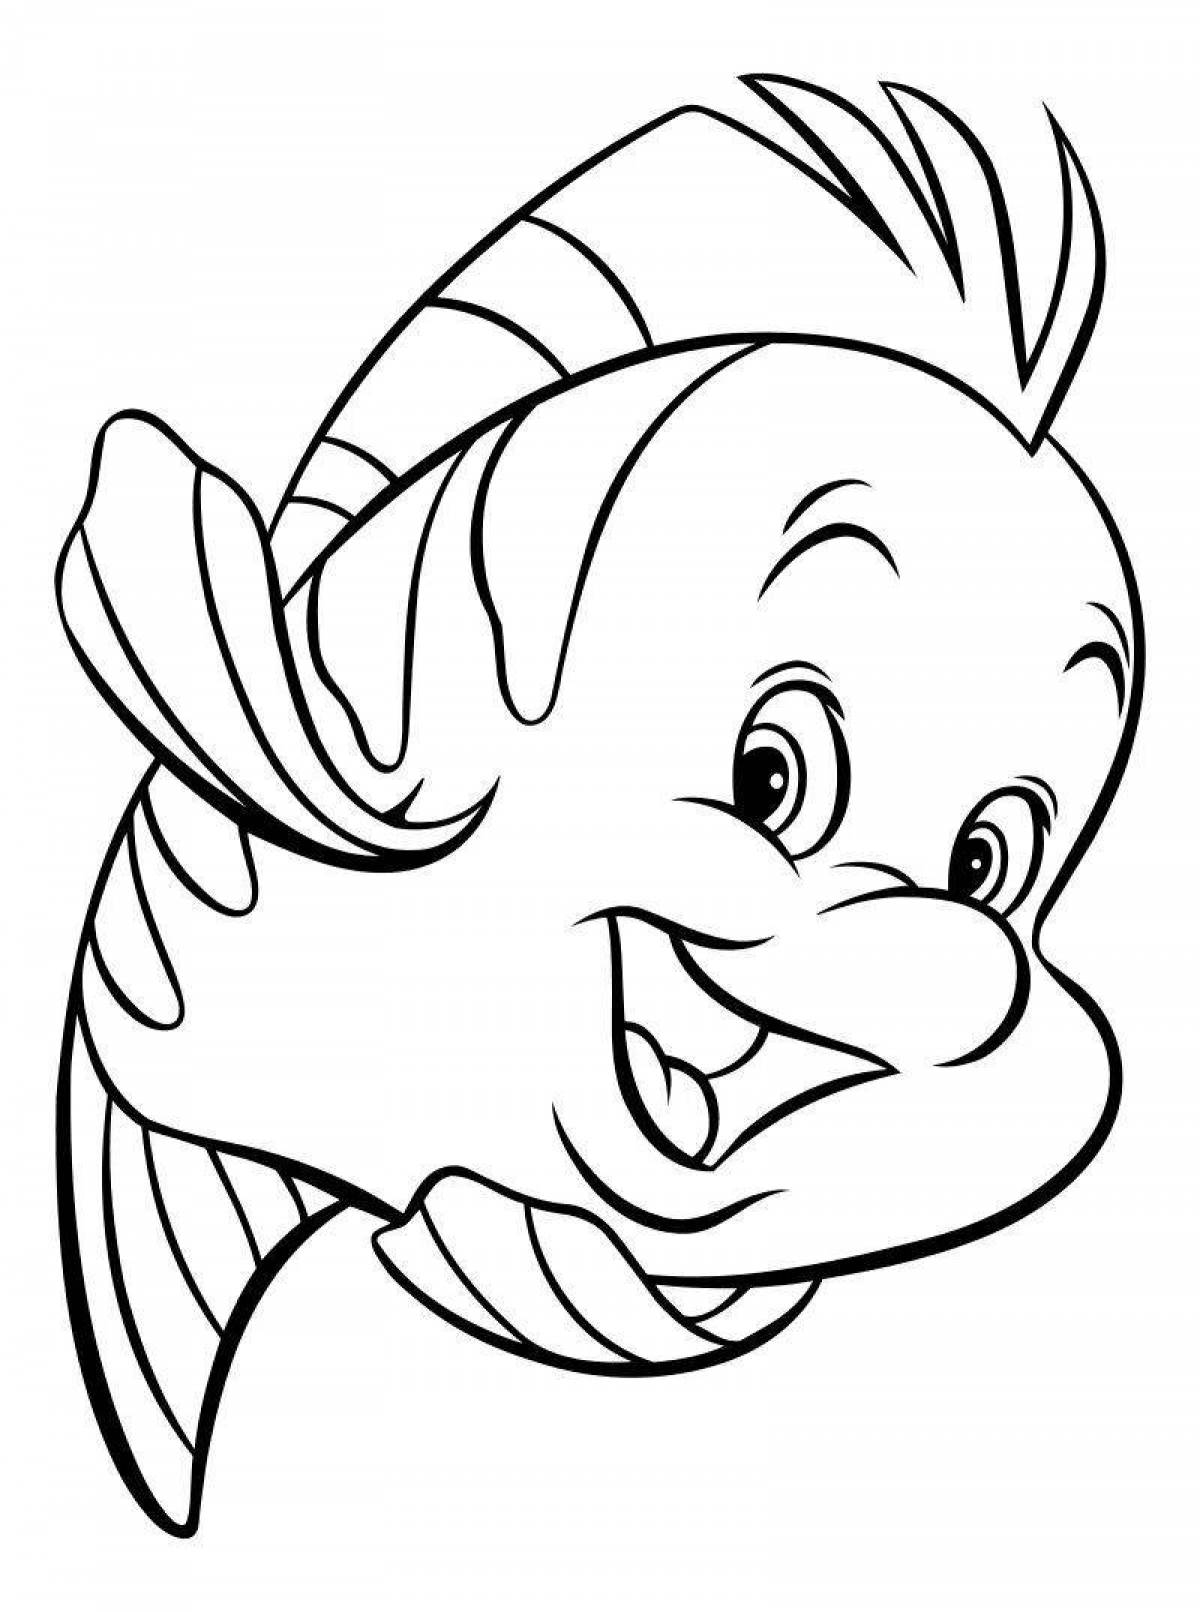 Color fervid floater coloring page